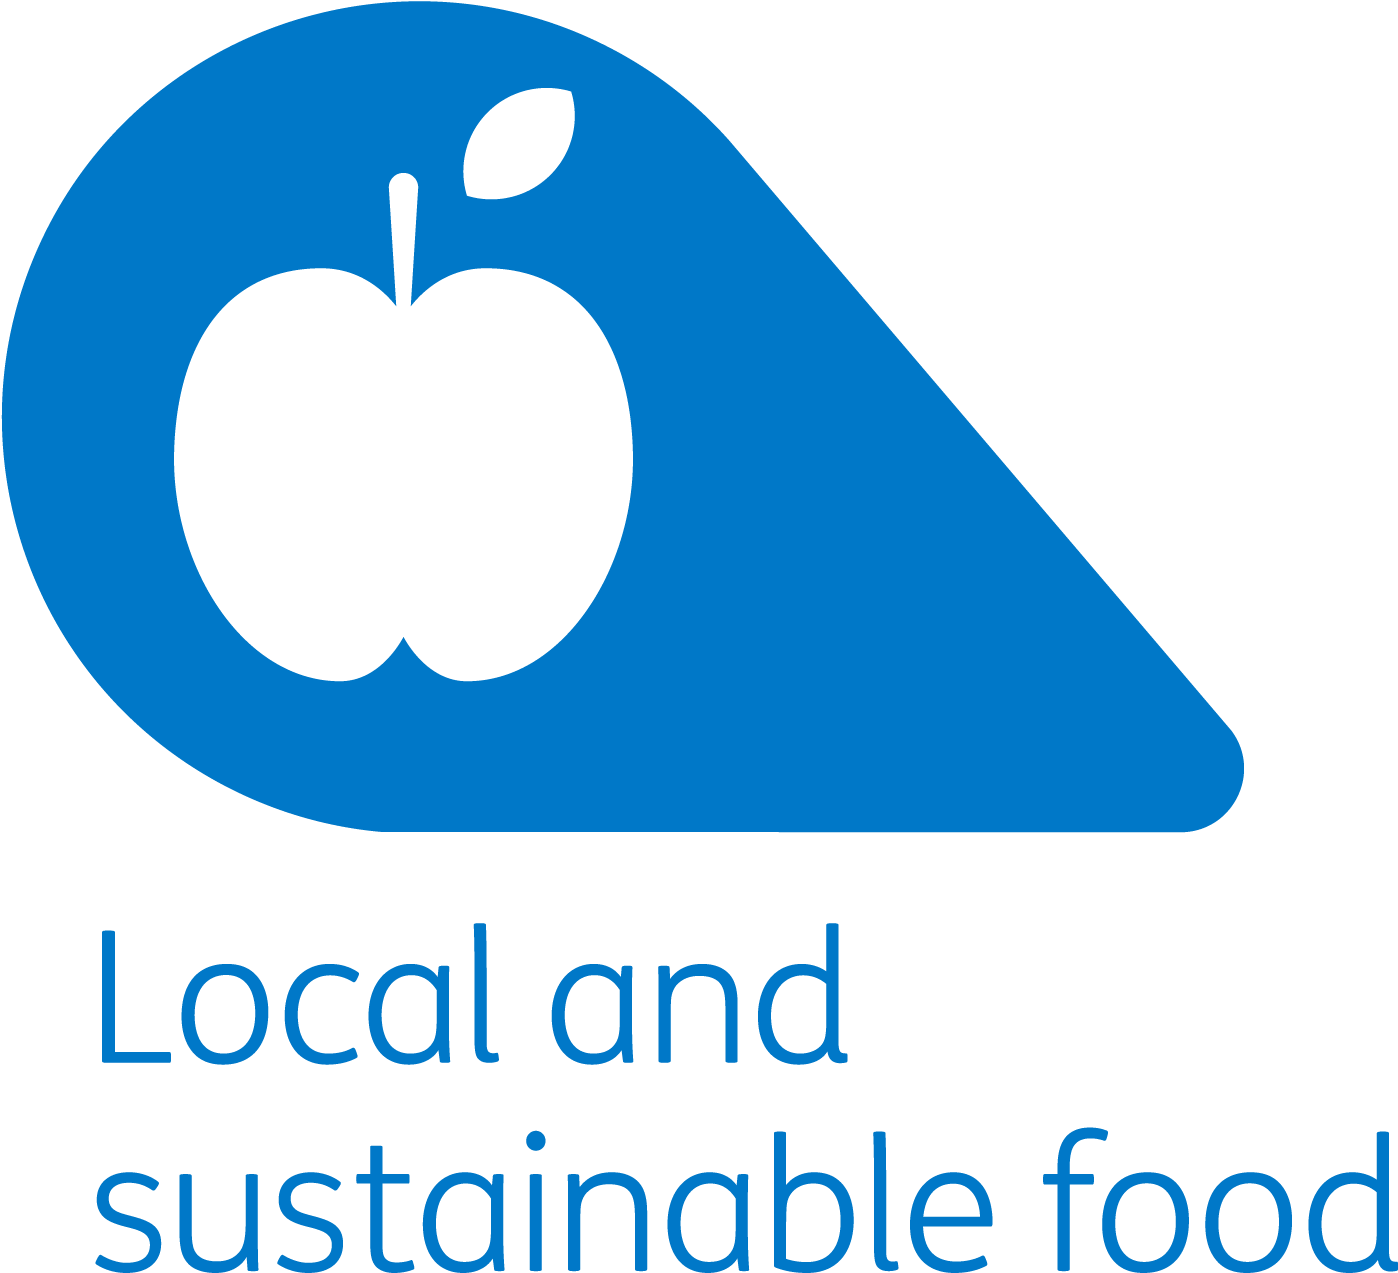 Local And Sustainable Food Petal - Graphic Design (2362x2362)